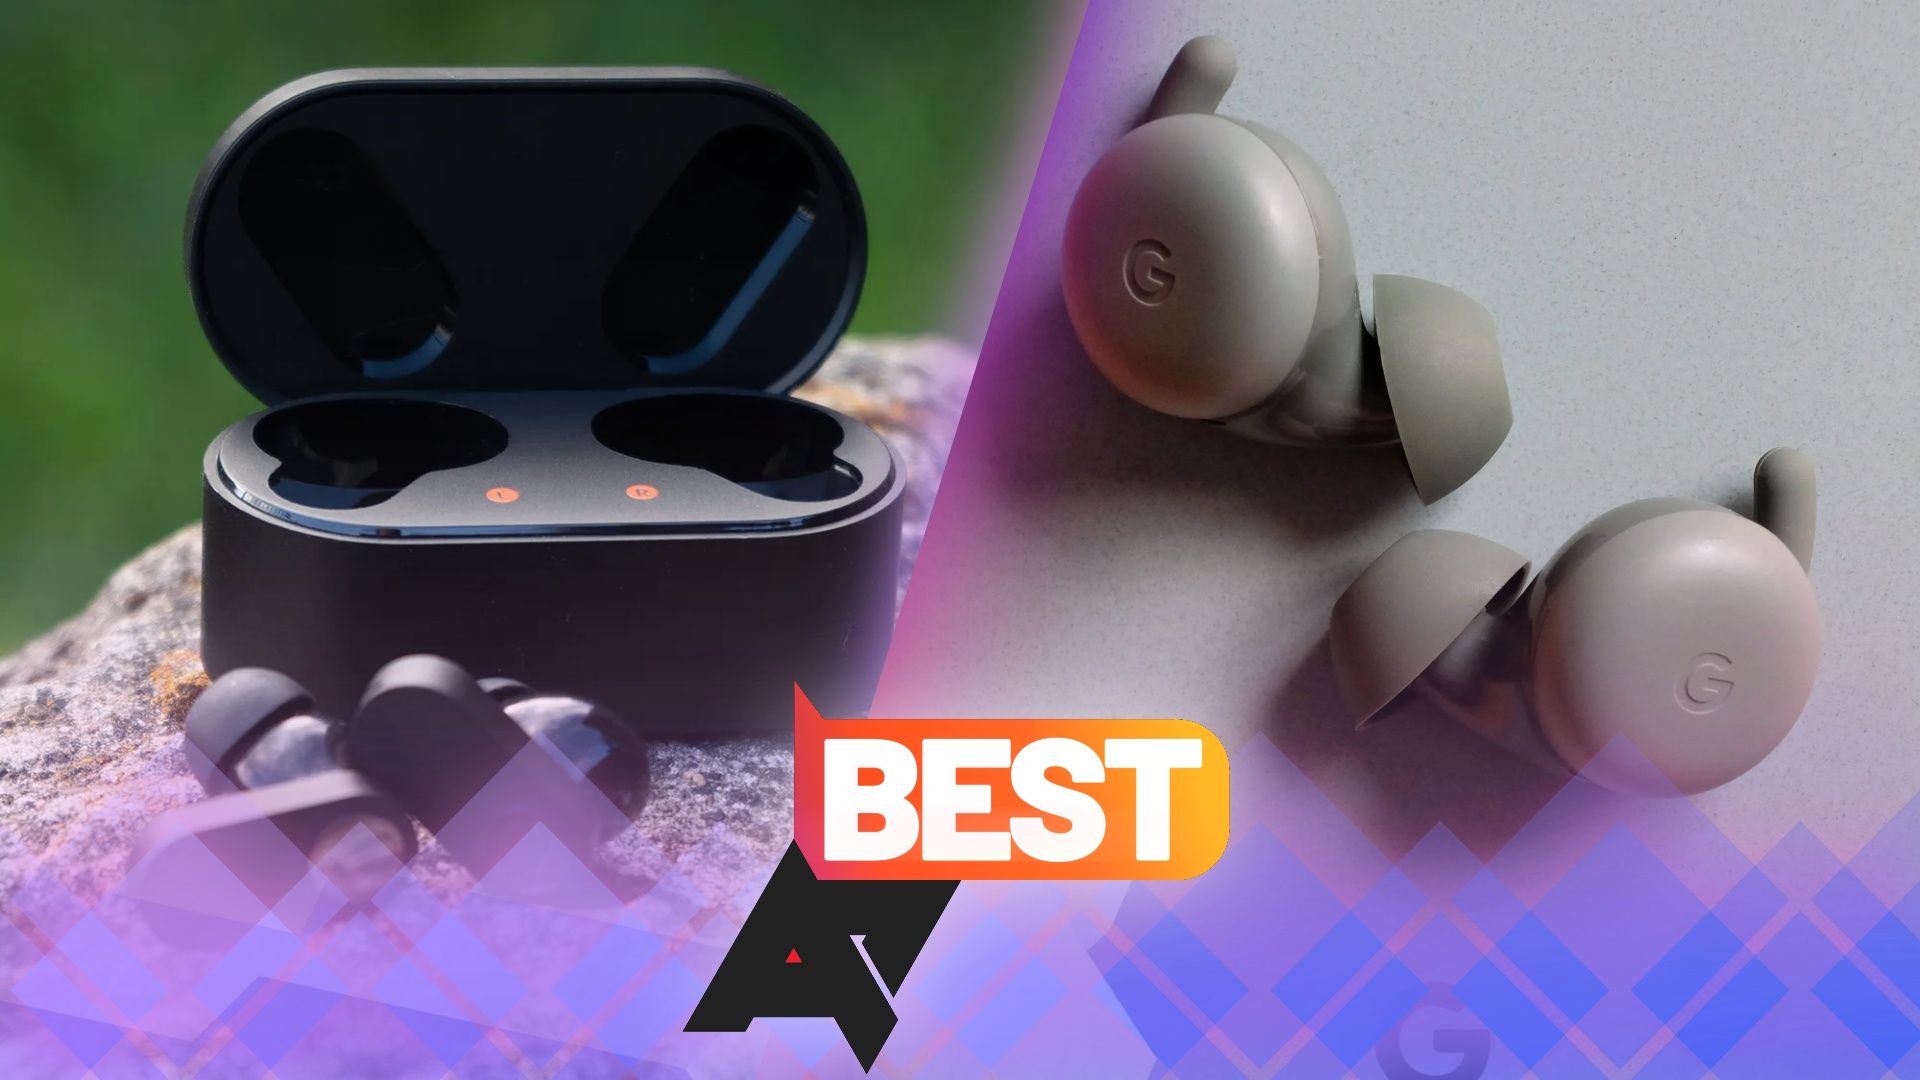 Two photos of wireless earbuds with an 'AP Best' logo